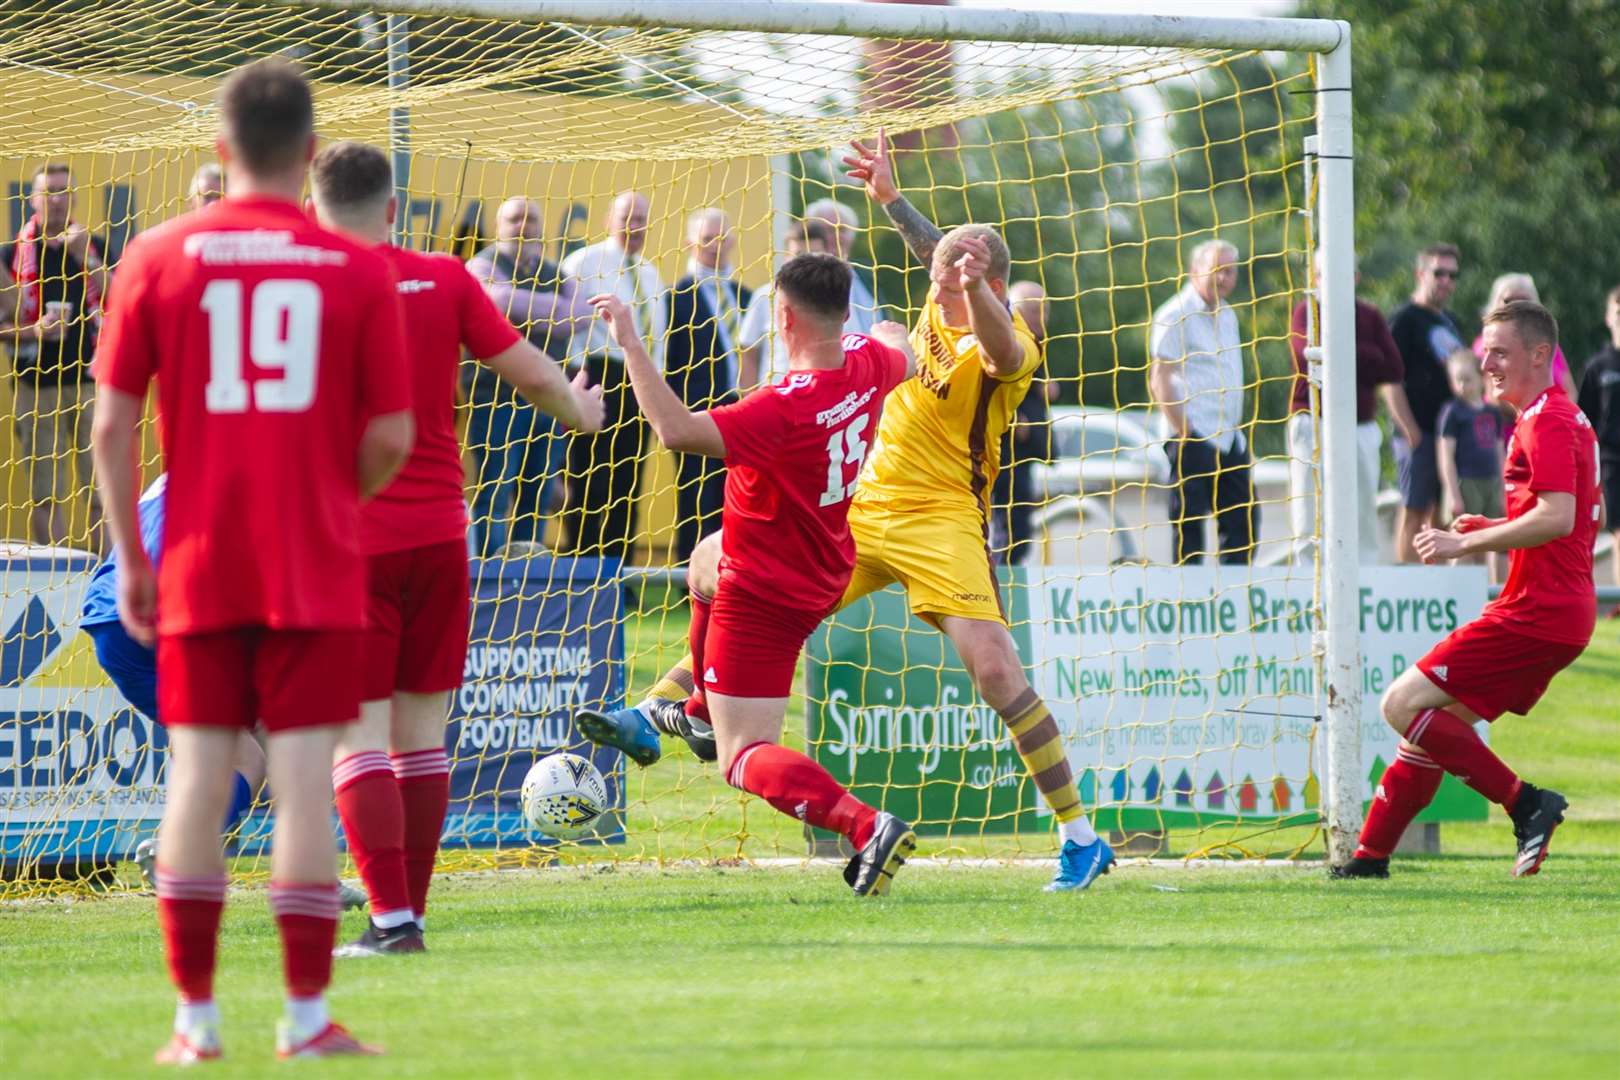 Forres frontman Lee Fraser pokes the ball home from close range scoring the only goal of the afternoon. ..Forres Mechanics FC (1) vs Lossiemouth FC (0) - Highland Football League - Mosset Park, Forres 28/08/2021...Picture: Daniel Forsyth..